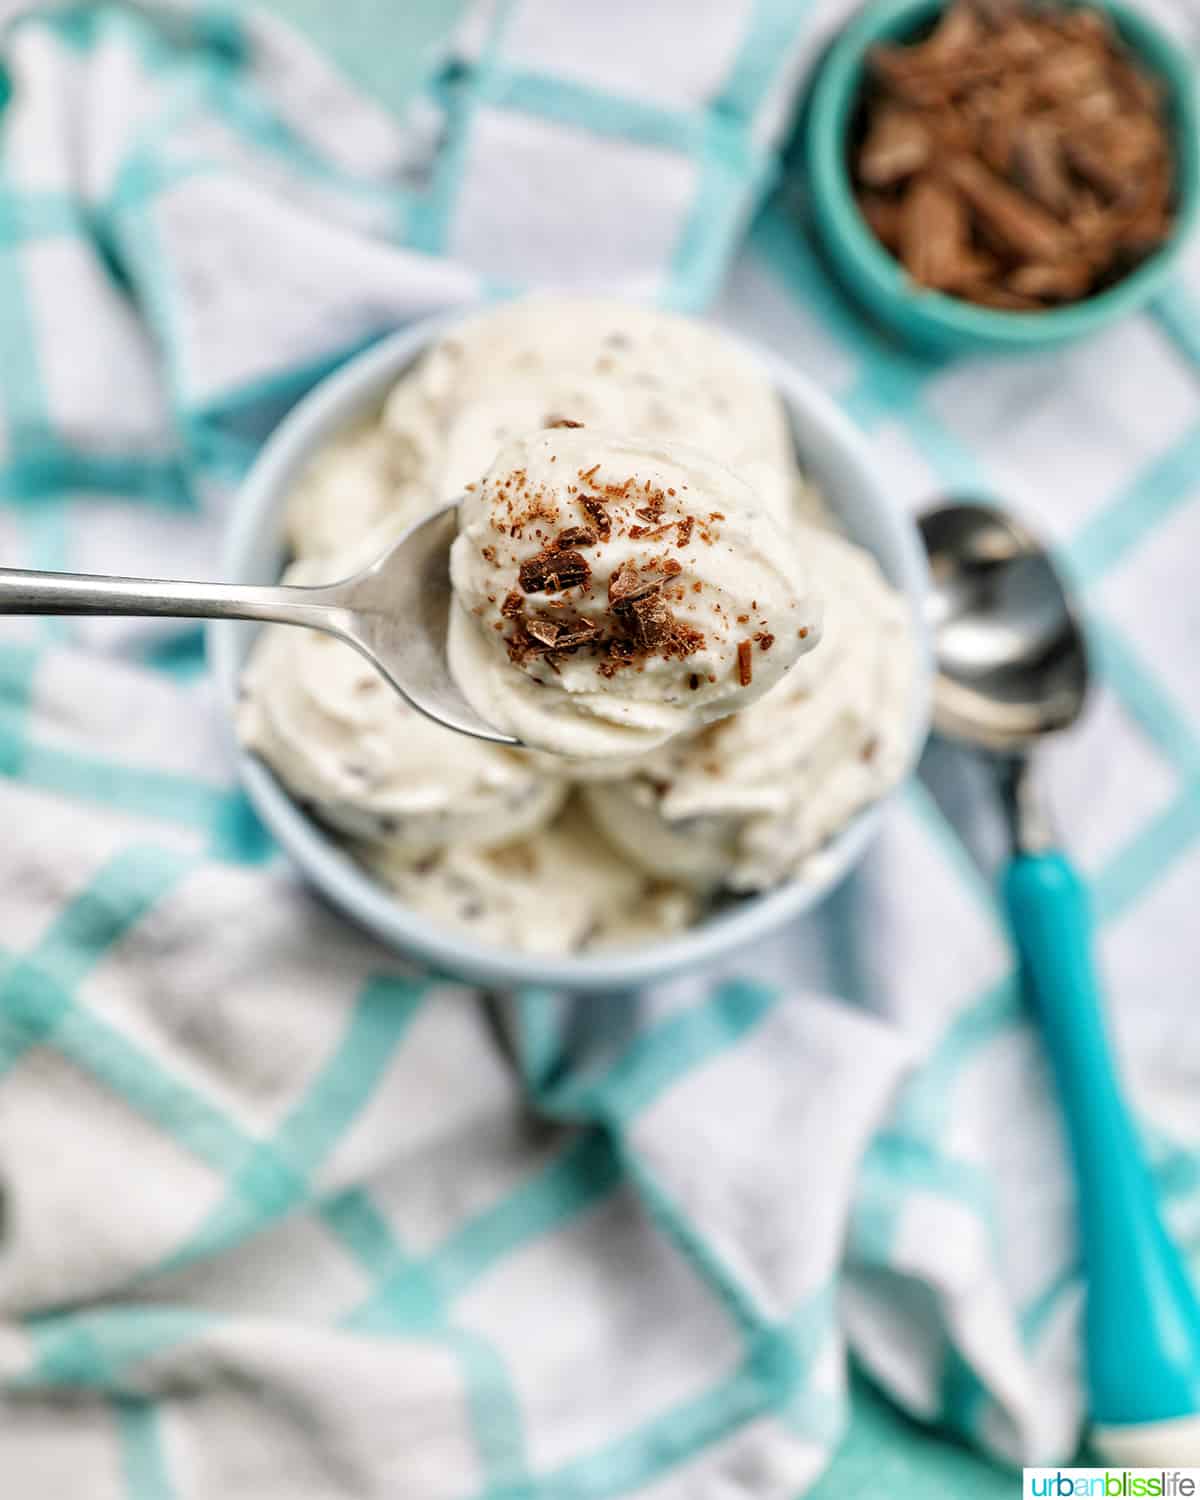 spoon scoop of bowl of stracciatella ice cream scoops with bowl of chocolate shavings on the side.